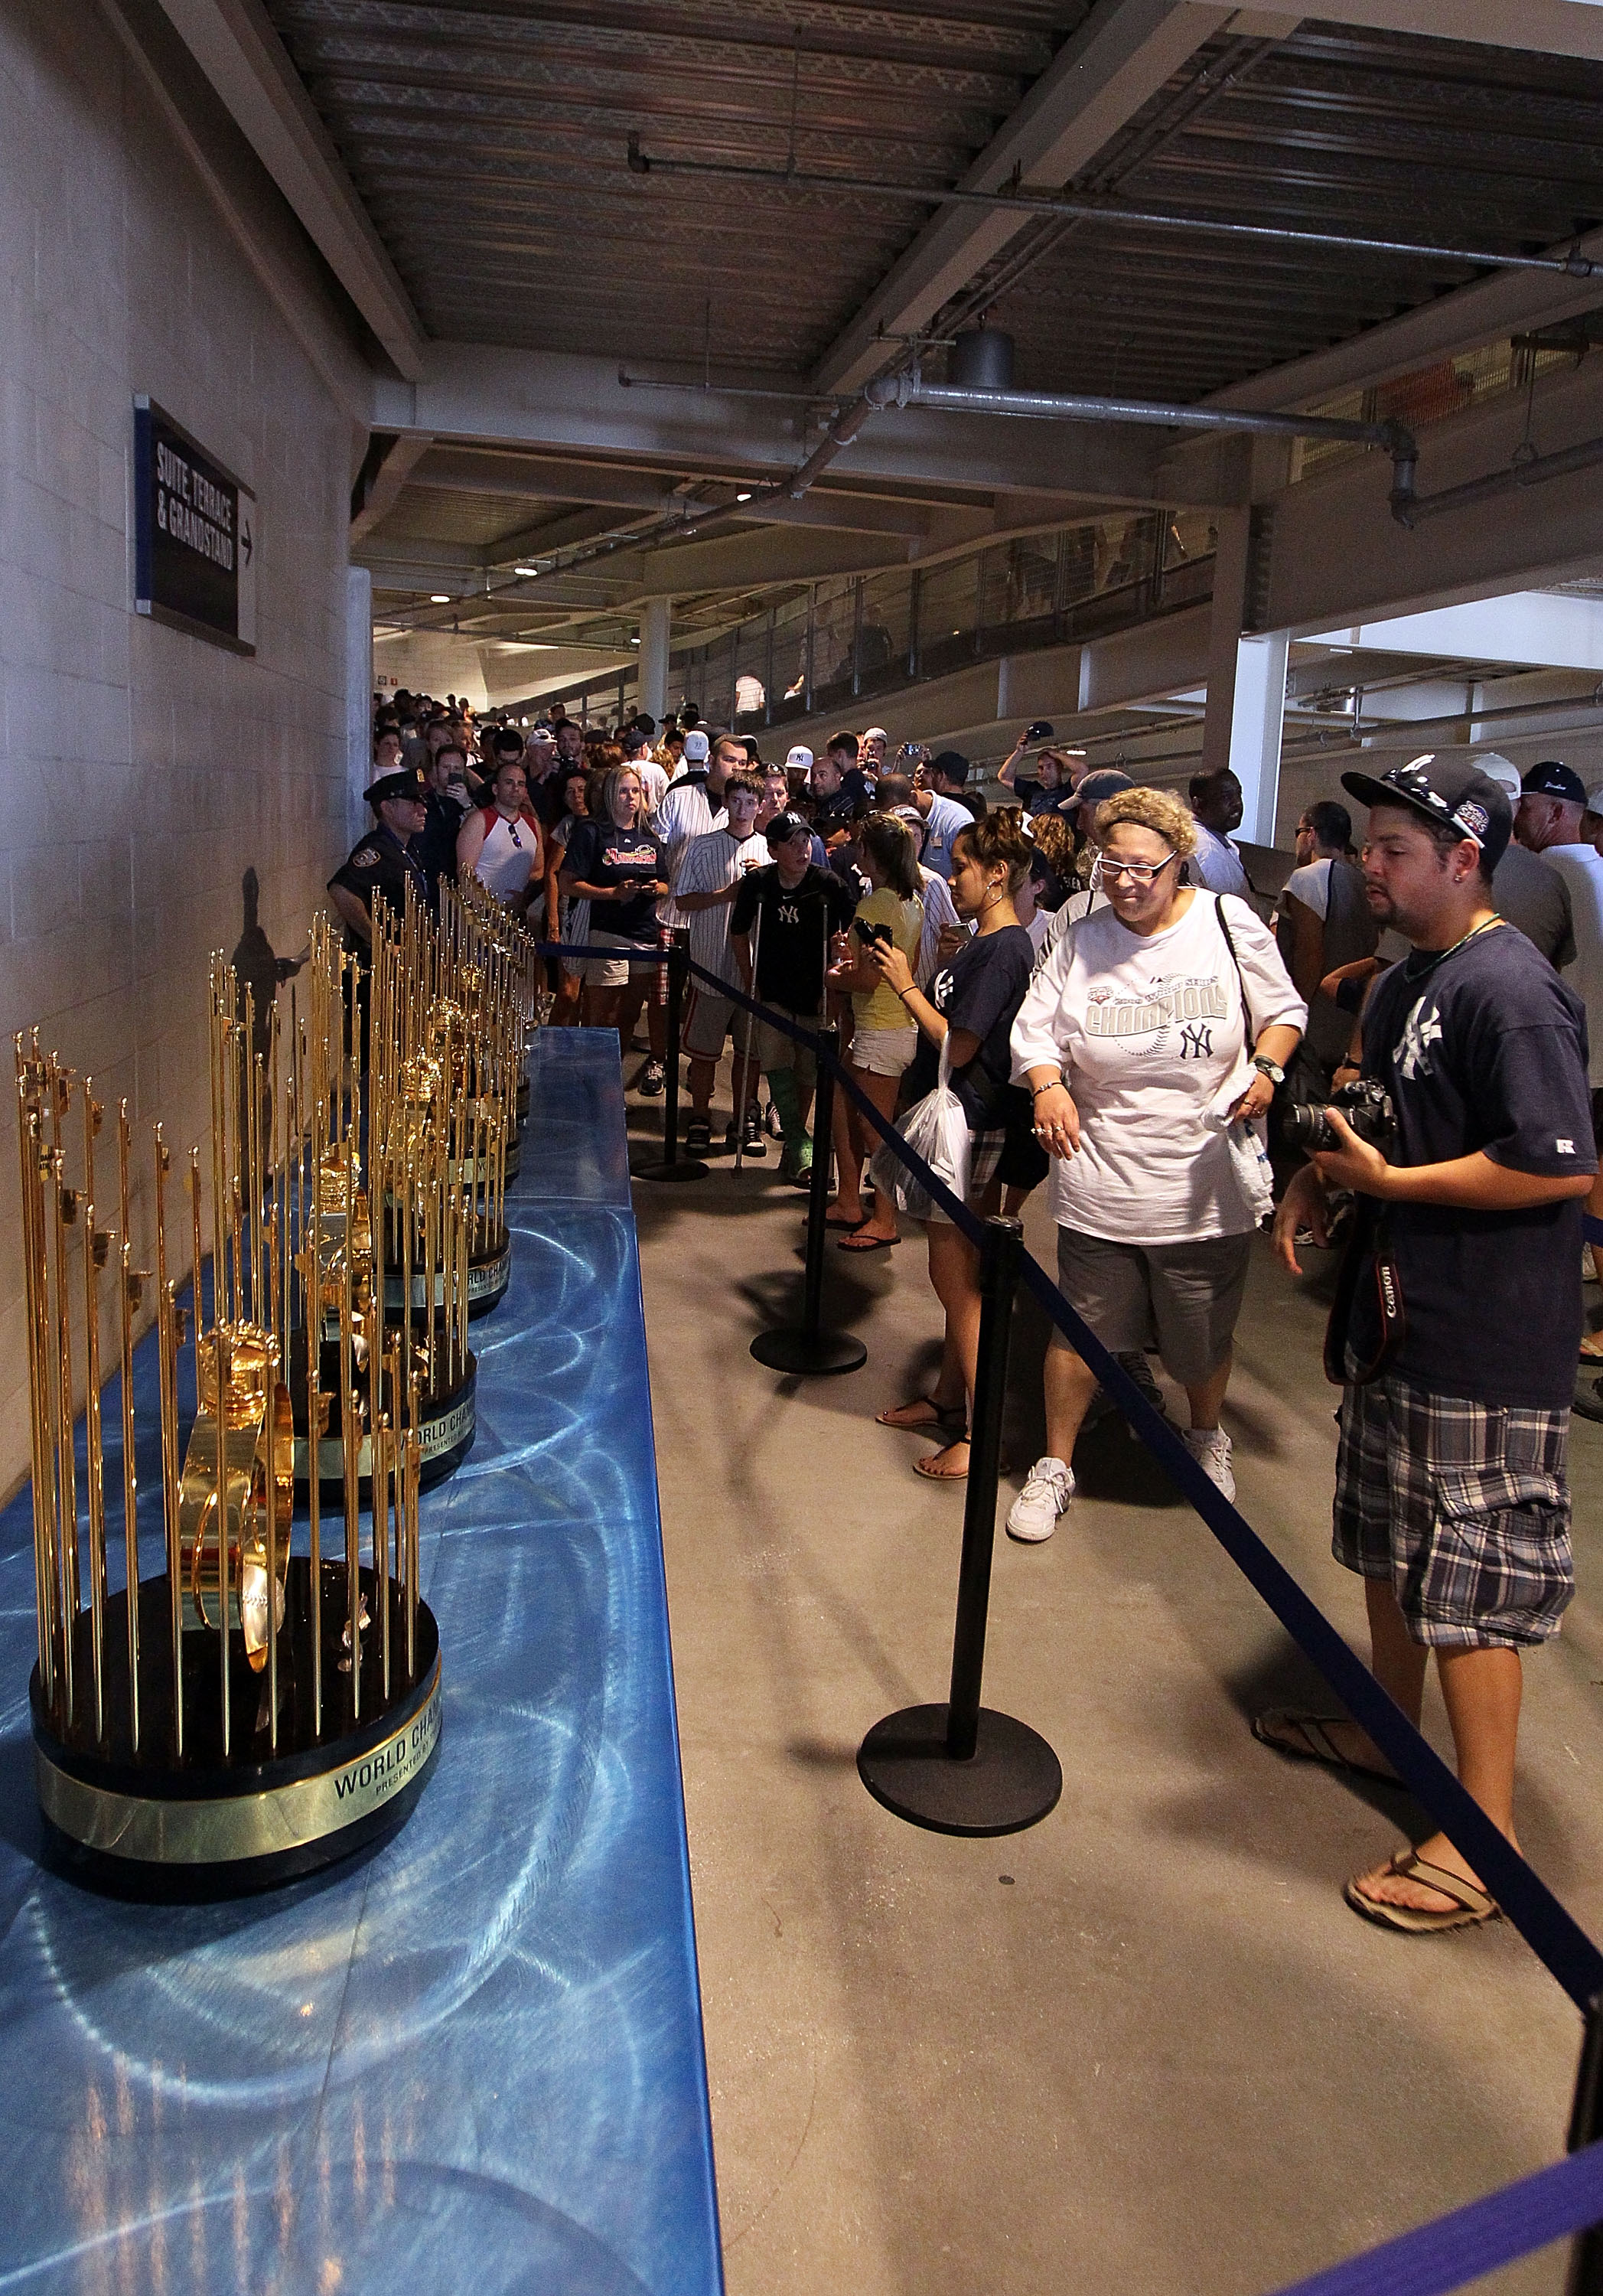 NEW YORK - JULY 04:  Fans photograph the seven World Series championship trophies won by the New York Yankees under the ownership of George Steinbrenner prior to the game against the Toronto Blue Jays on July 4, 2010 at Yankee Stadium in the Bronx borough